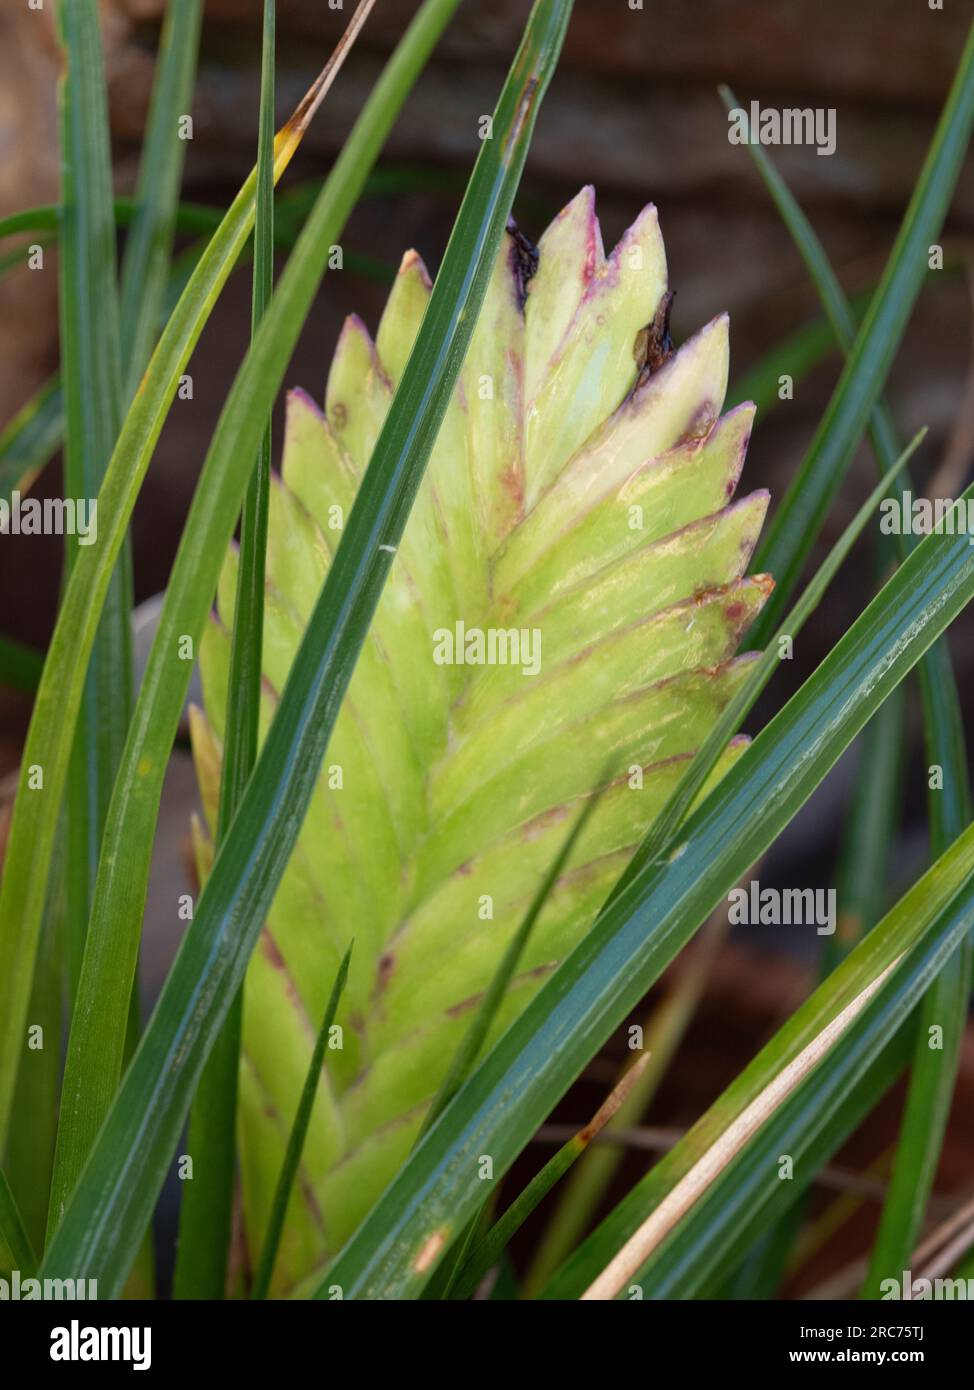 Pink bracts turning green at the end of the life cycle on the Paddle-shaped flower spike of Tillandsia Cyanea or Pink Quill plant Stock Photo